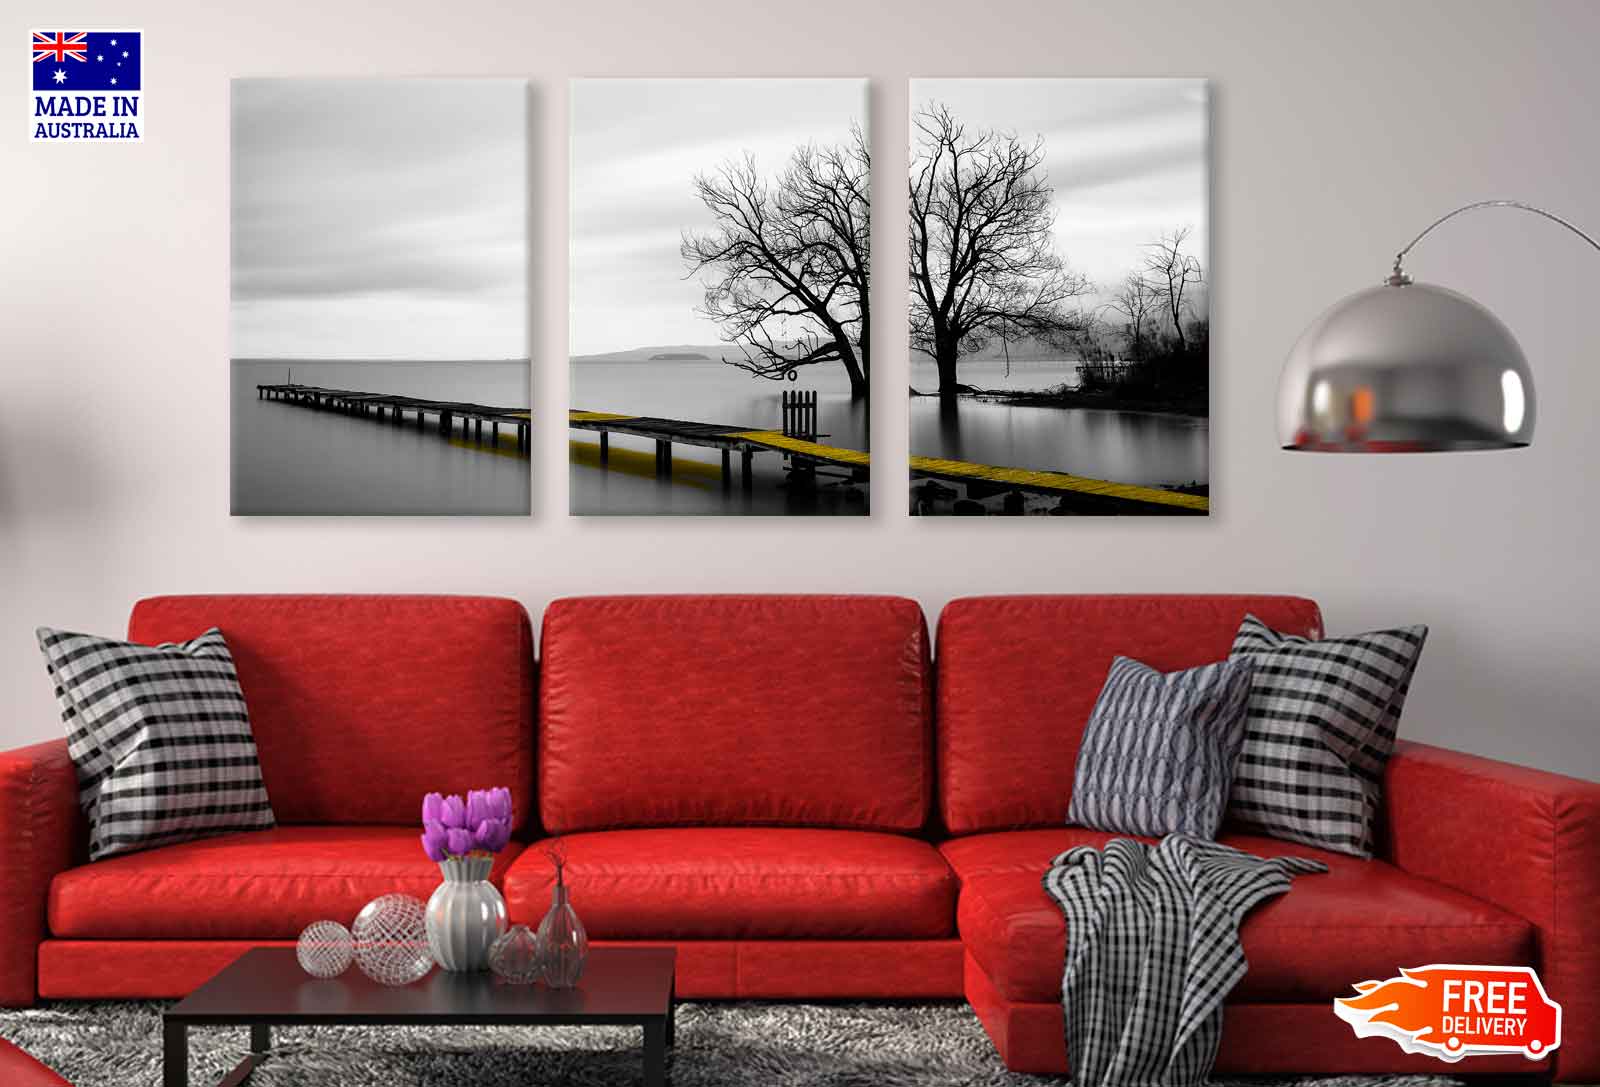 3 Set of Yellow Wooden Pier Lake High Quality Print 100% Australian Made Wall Canvas Ready to Hang